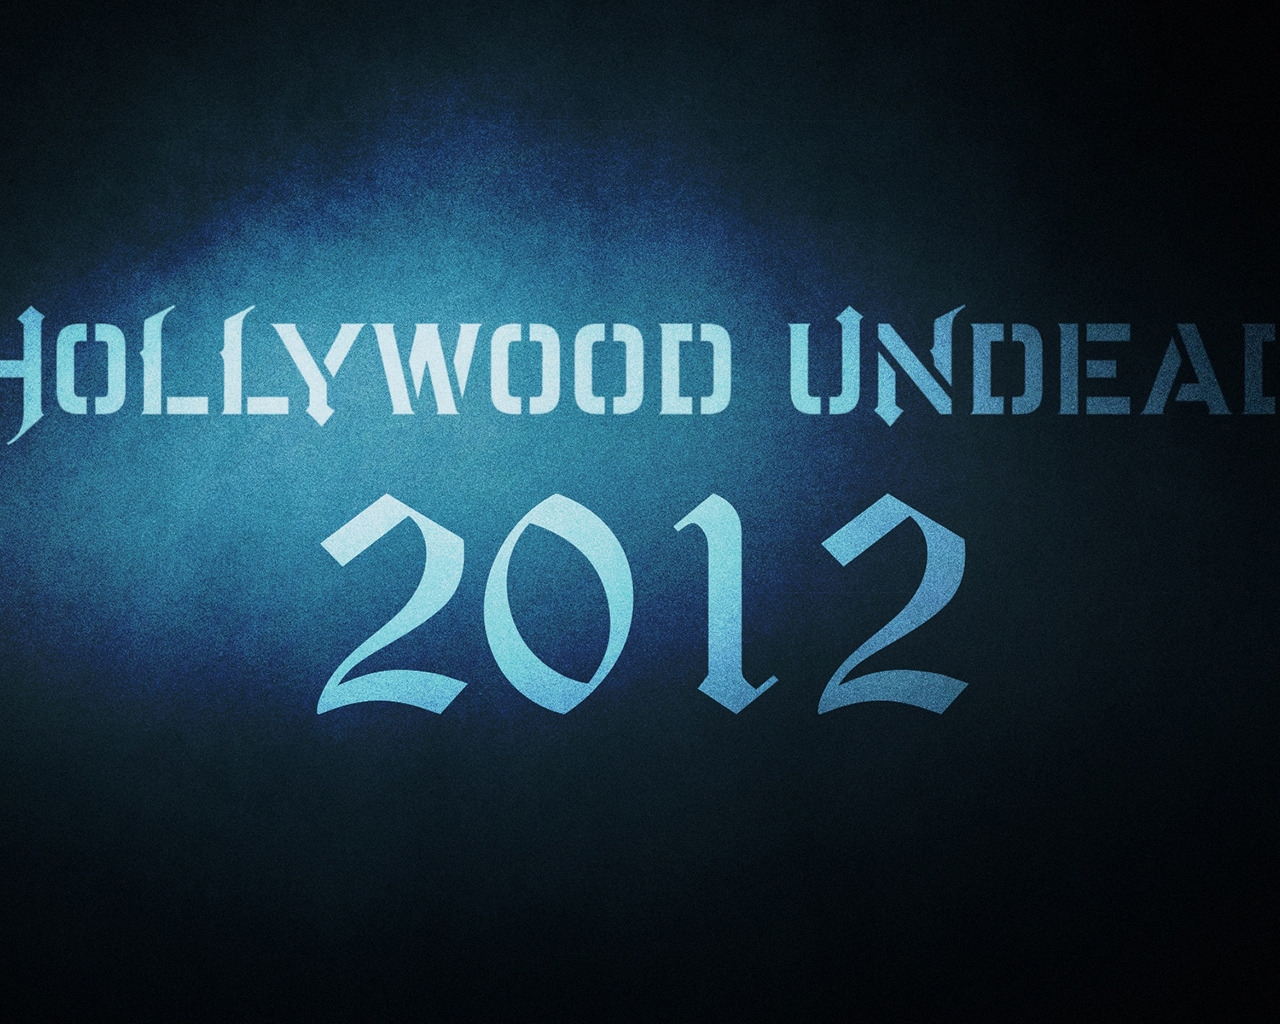 Hollywood Undead 2012 for 1280 x 1024 resolution